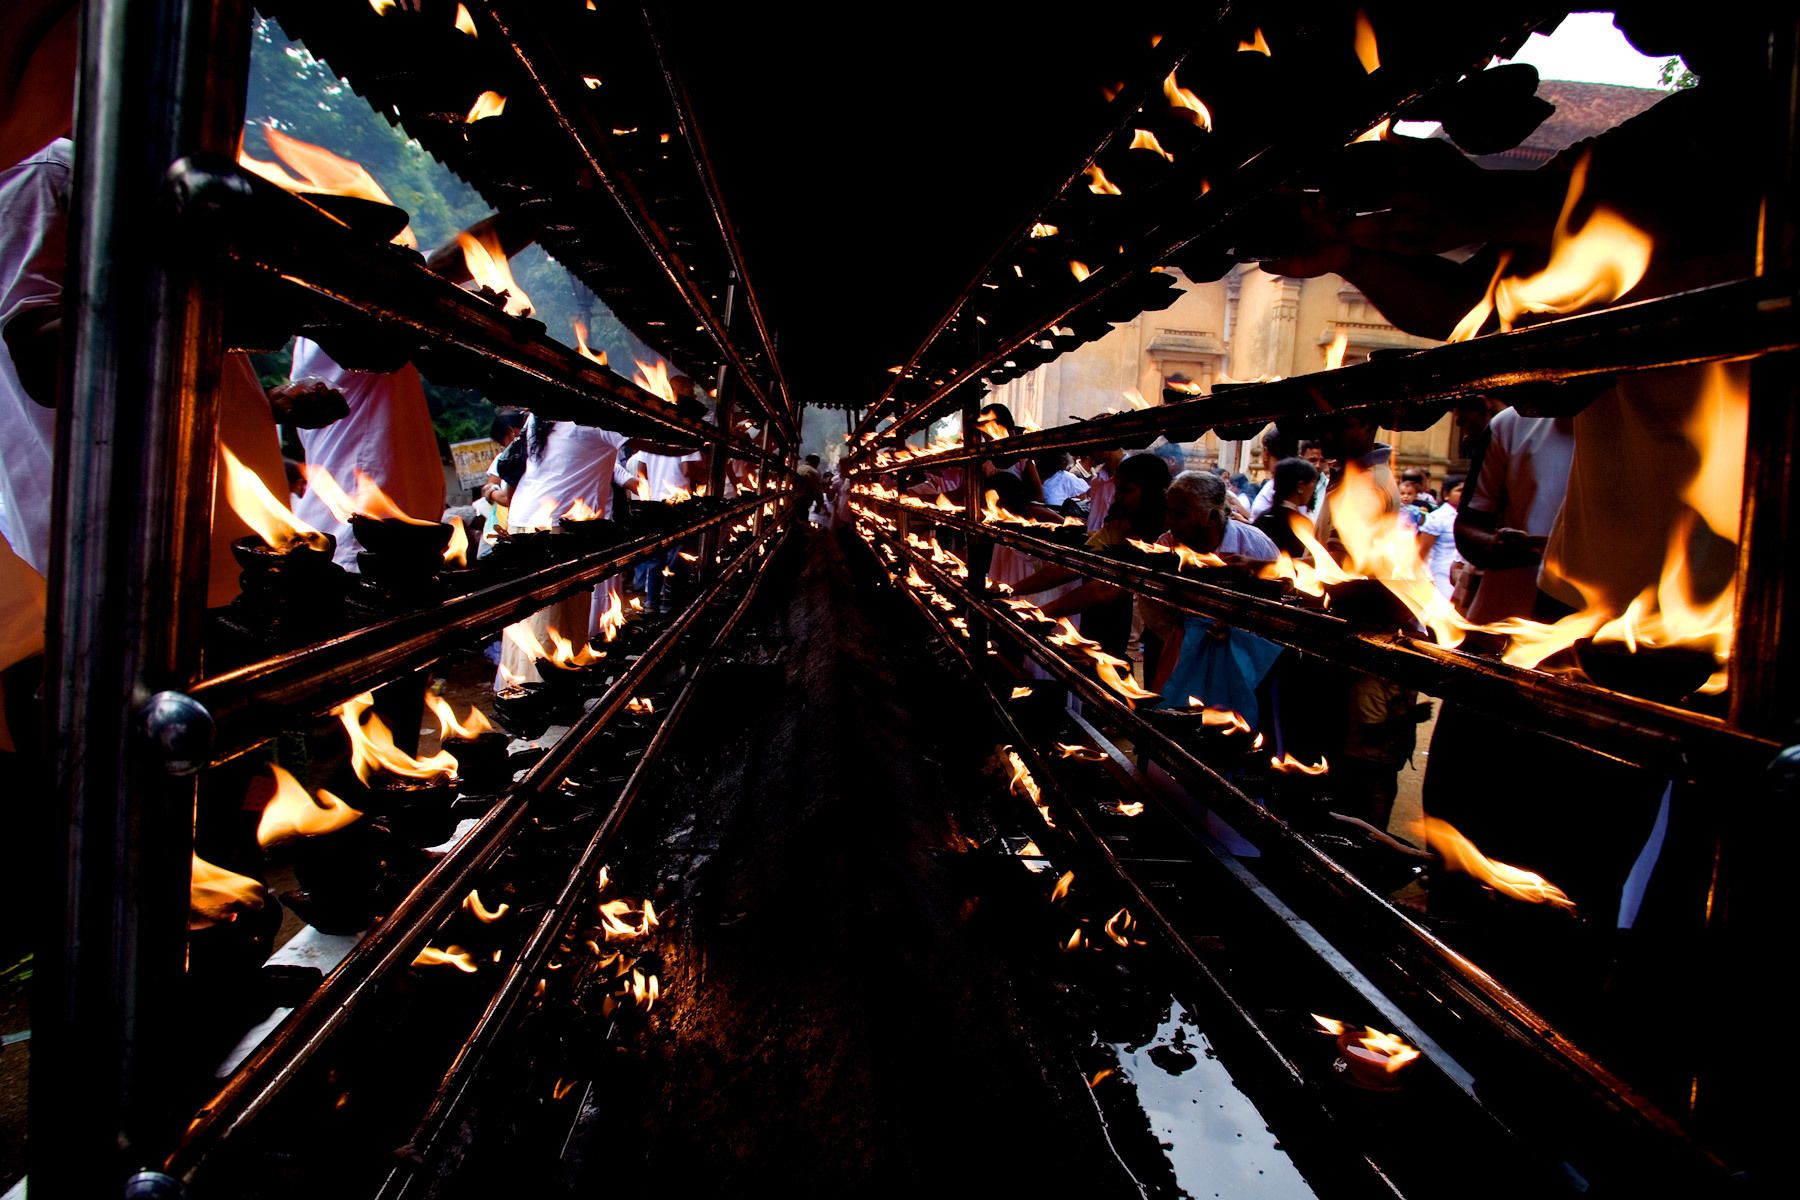 Lamps at a Buddhist Temple.